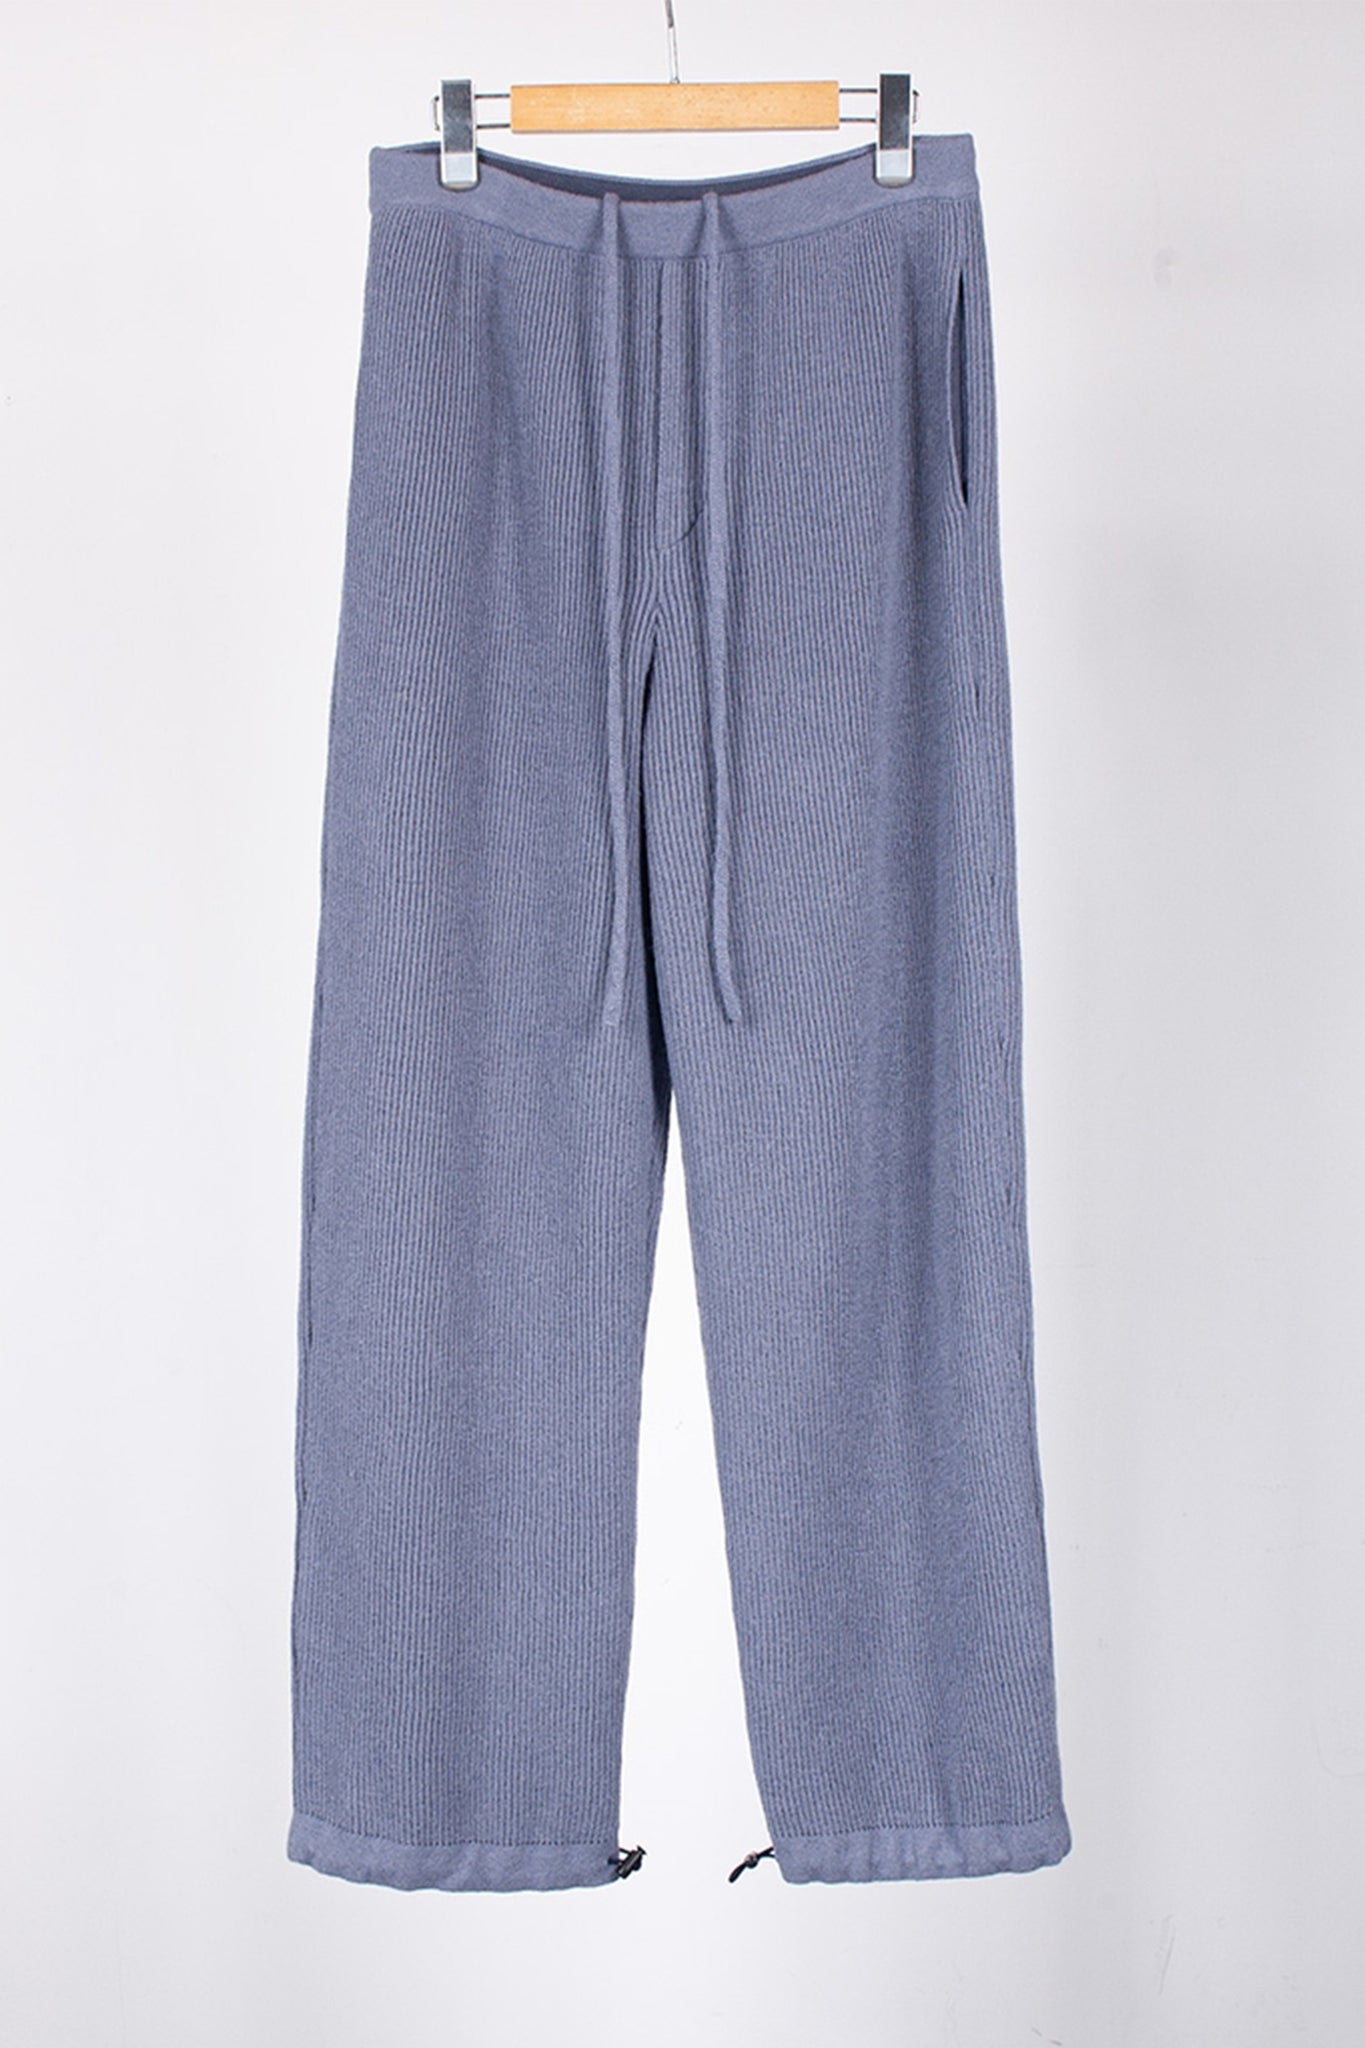 THE INOUE BROTHERS... "BABY ALPACA PANTS / LILAC"